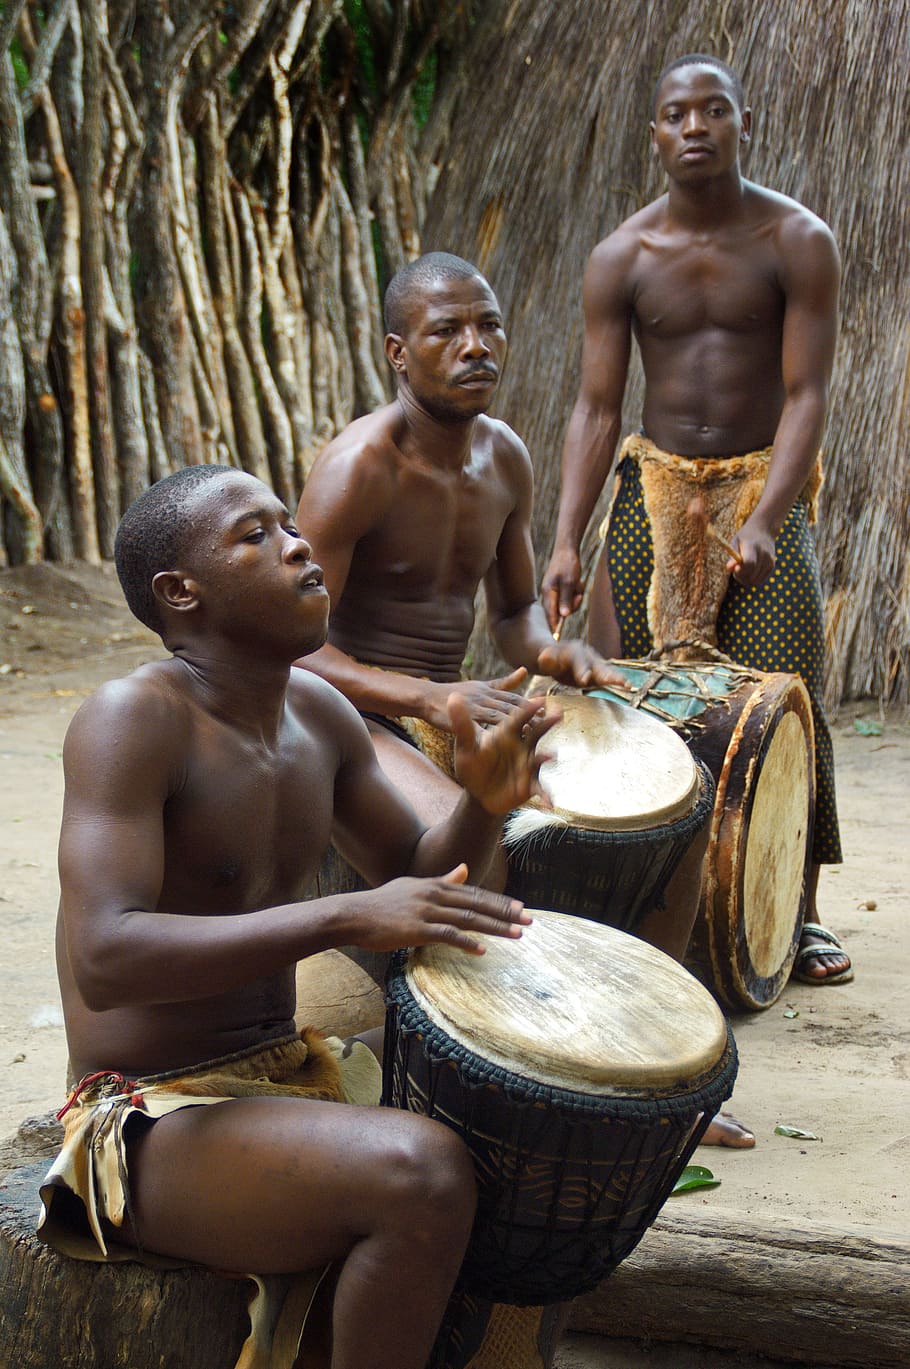 three, men, playing, drums, south africa, drum, zulu, festival, ethnic, shirtless